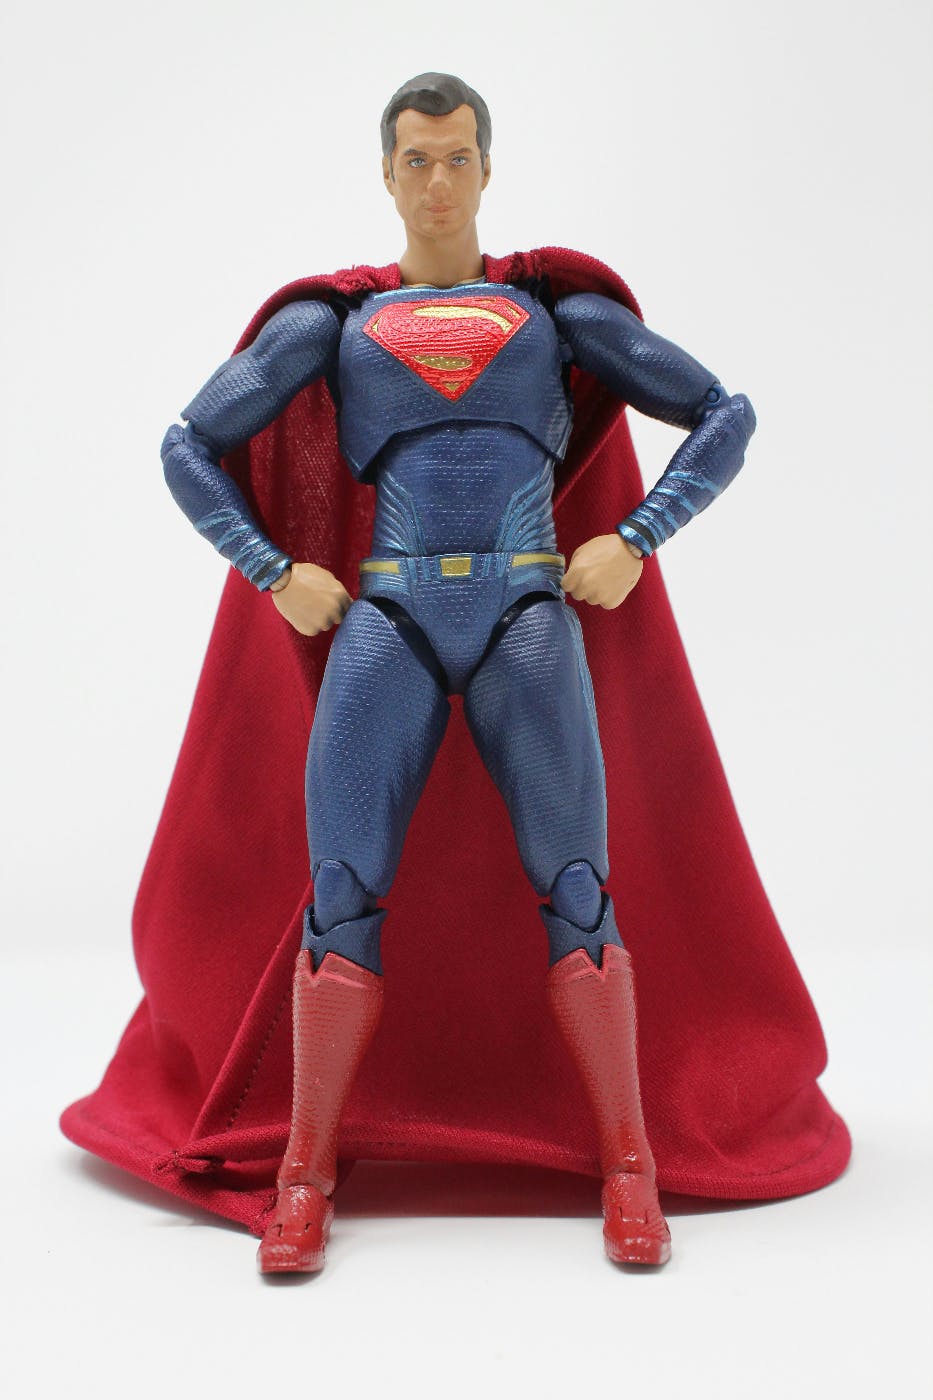 A Superman action toy